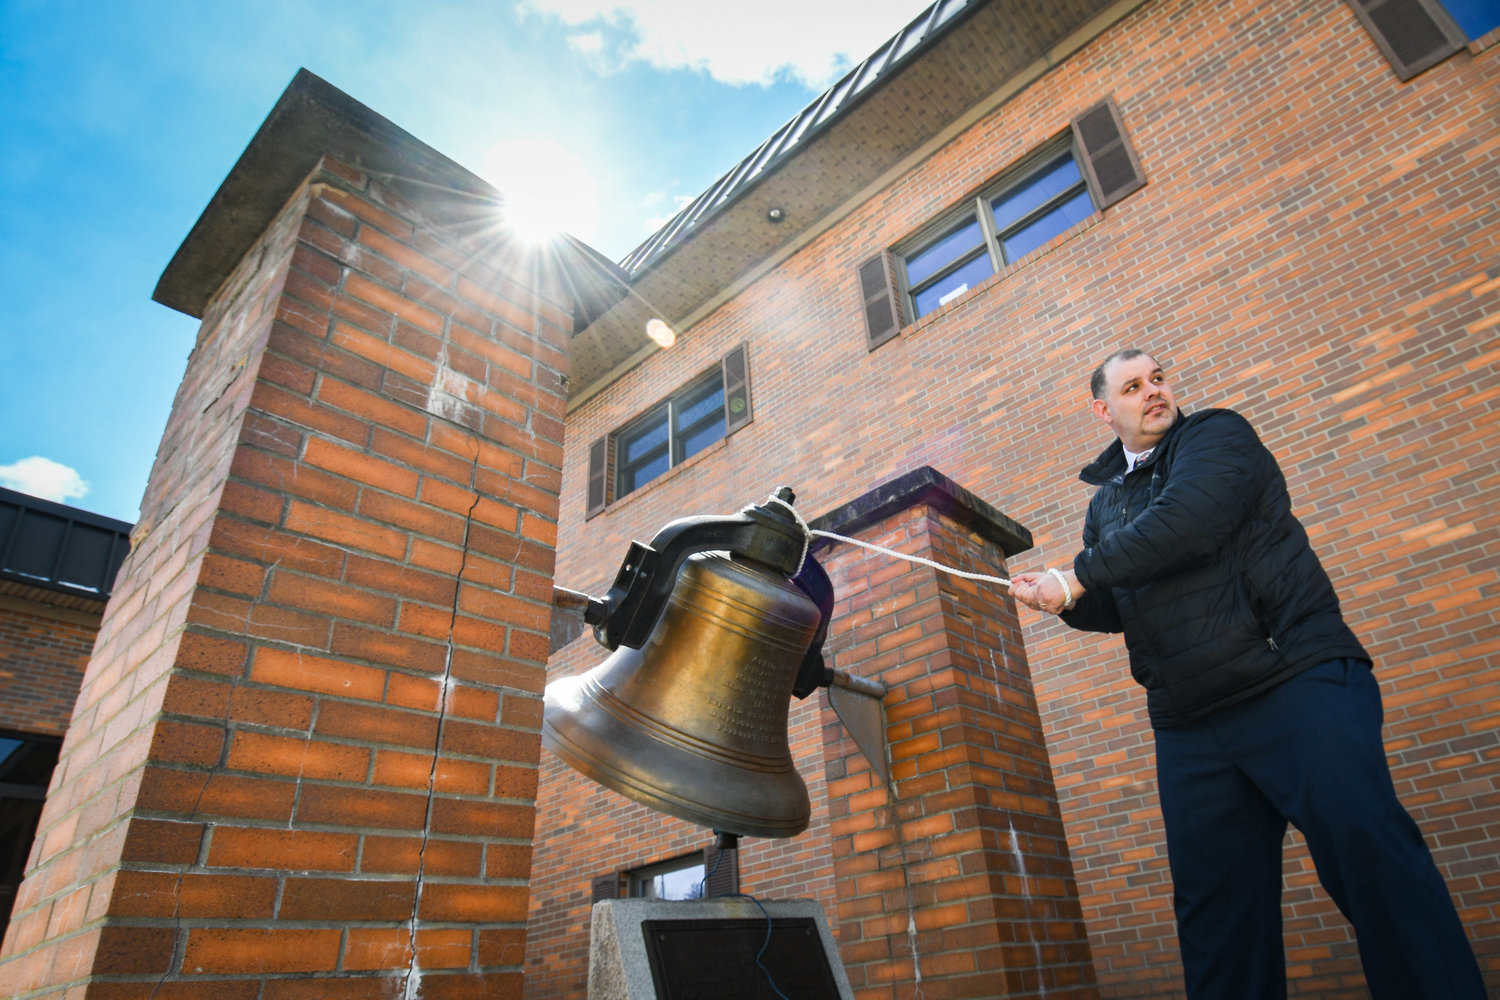 New York Mills mayor Ernie Talerico rings a bell outside of the village’s fire department in this file photo. The village has a day of activities planned to celebrate its centennial on Saturday, July 9, at Pulaski Park.